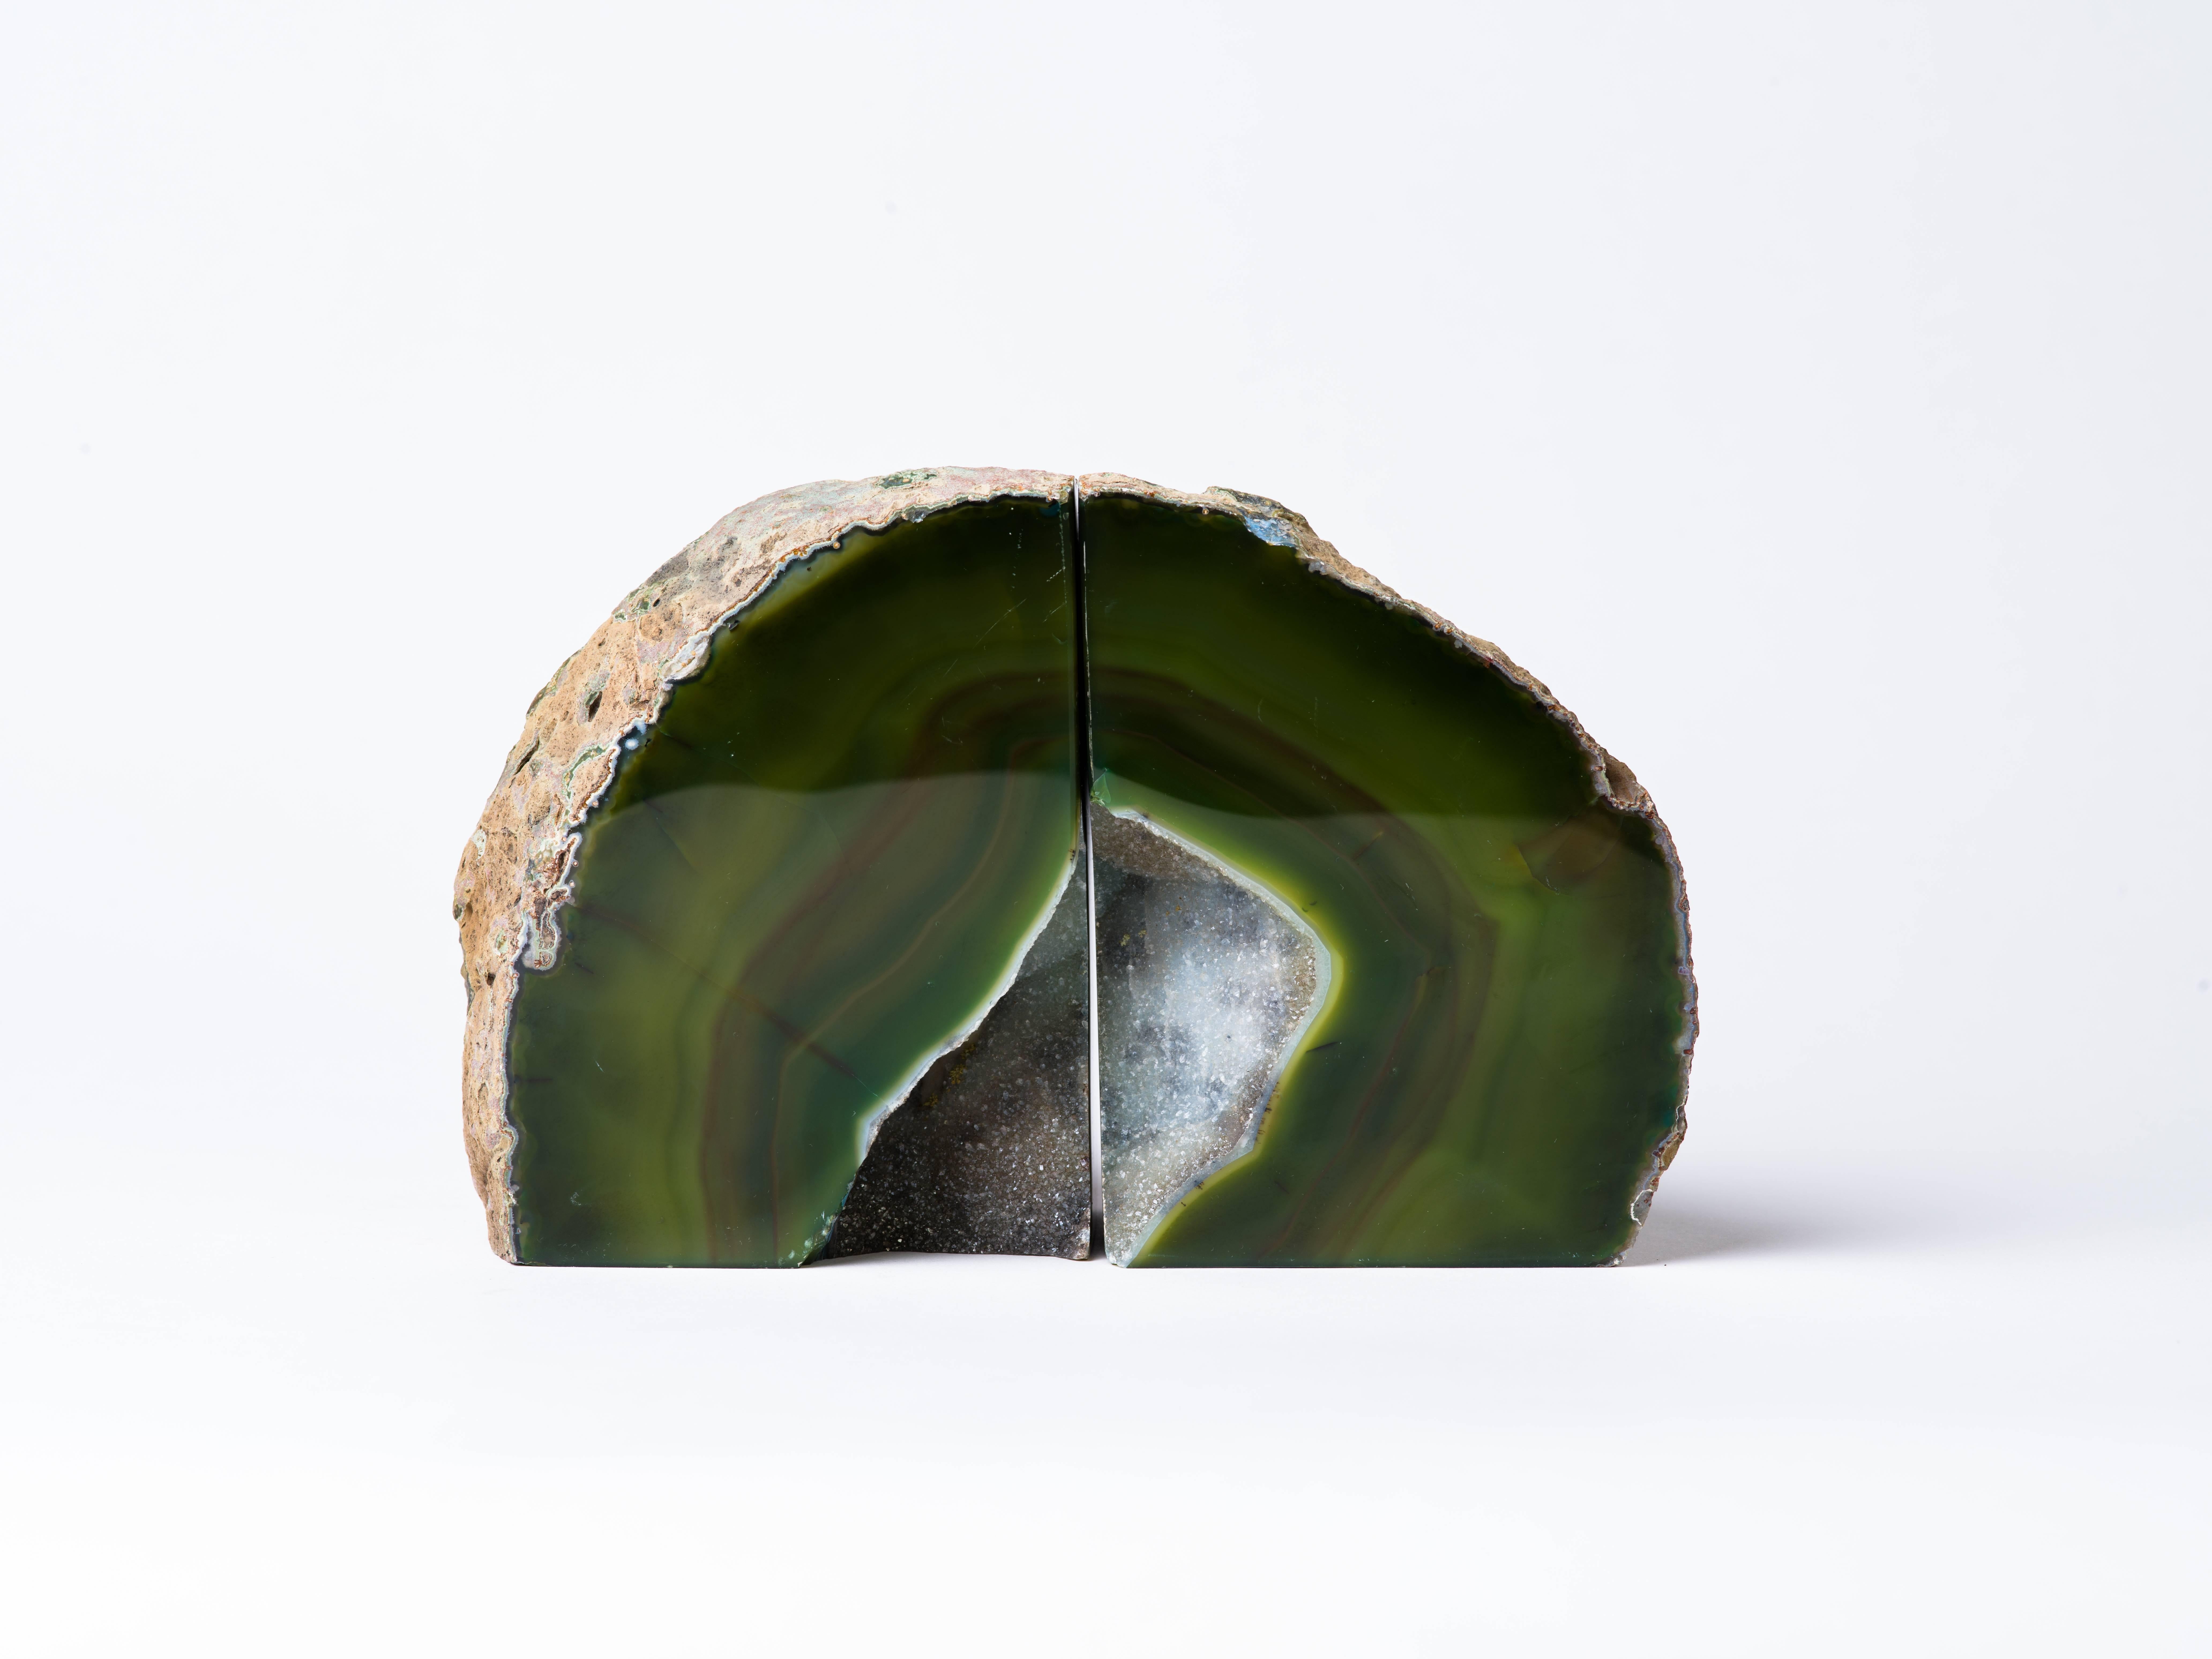 Pair of Organic Modern Agate Stone and Crystal Bookends in Moss Green (Brasilianisch)